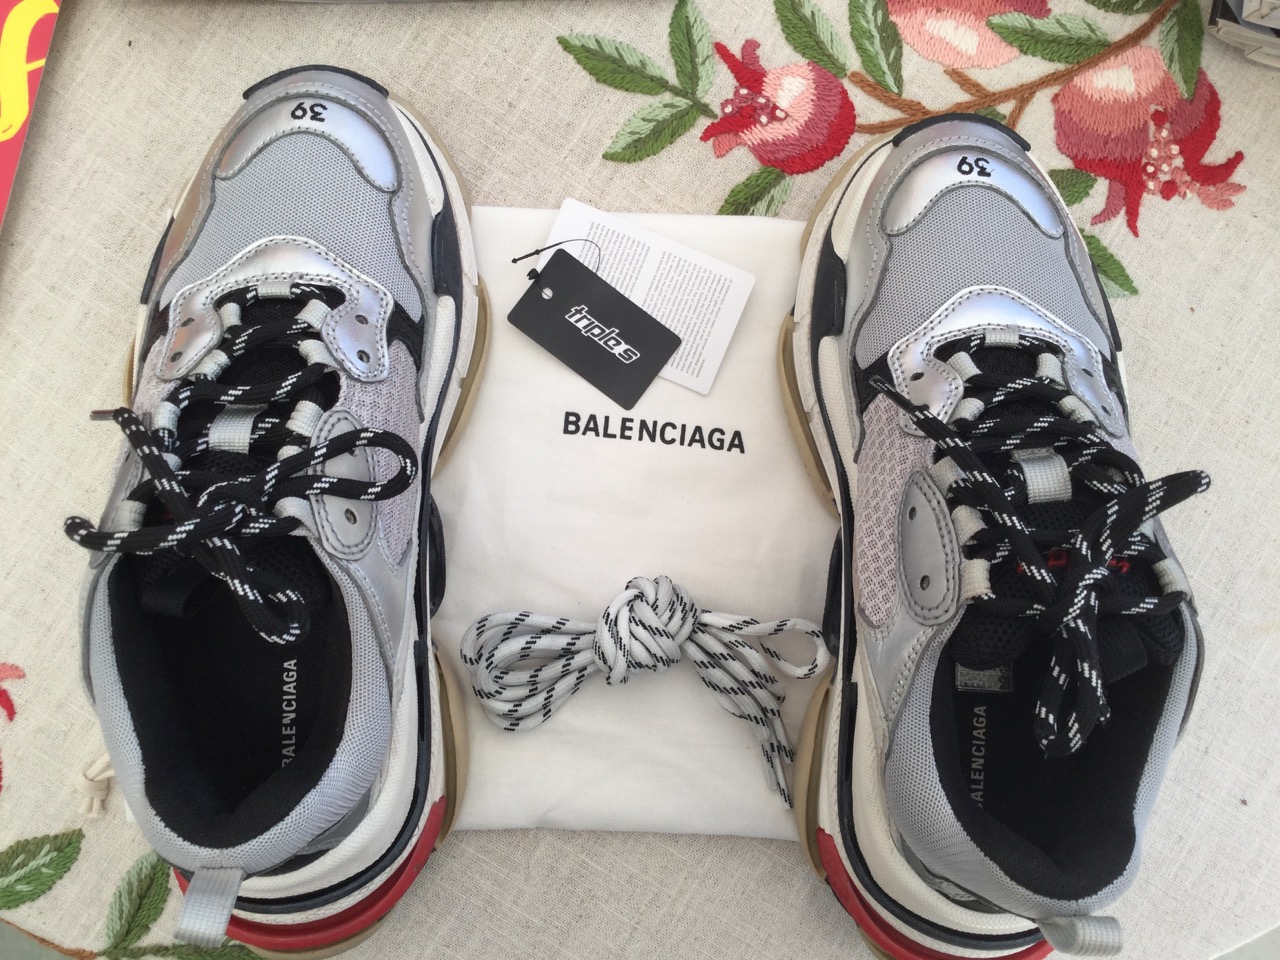 Triple S Sneakers The Best Balenciaga Of Ugly qPwx8yd7